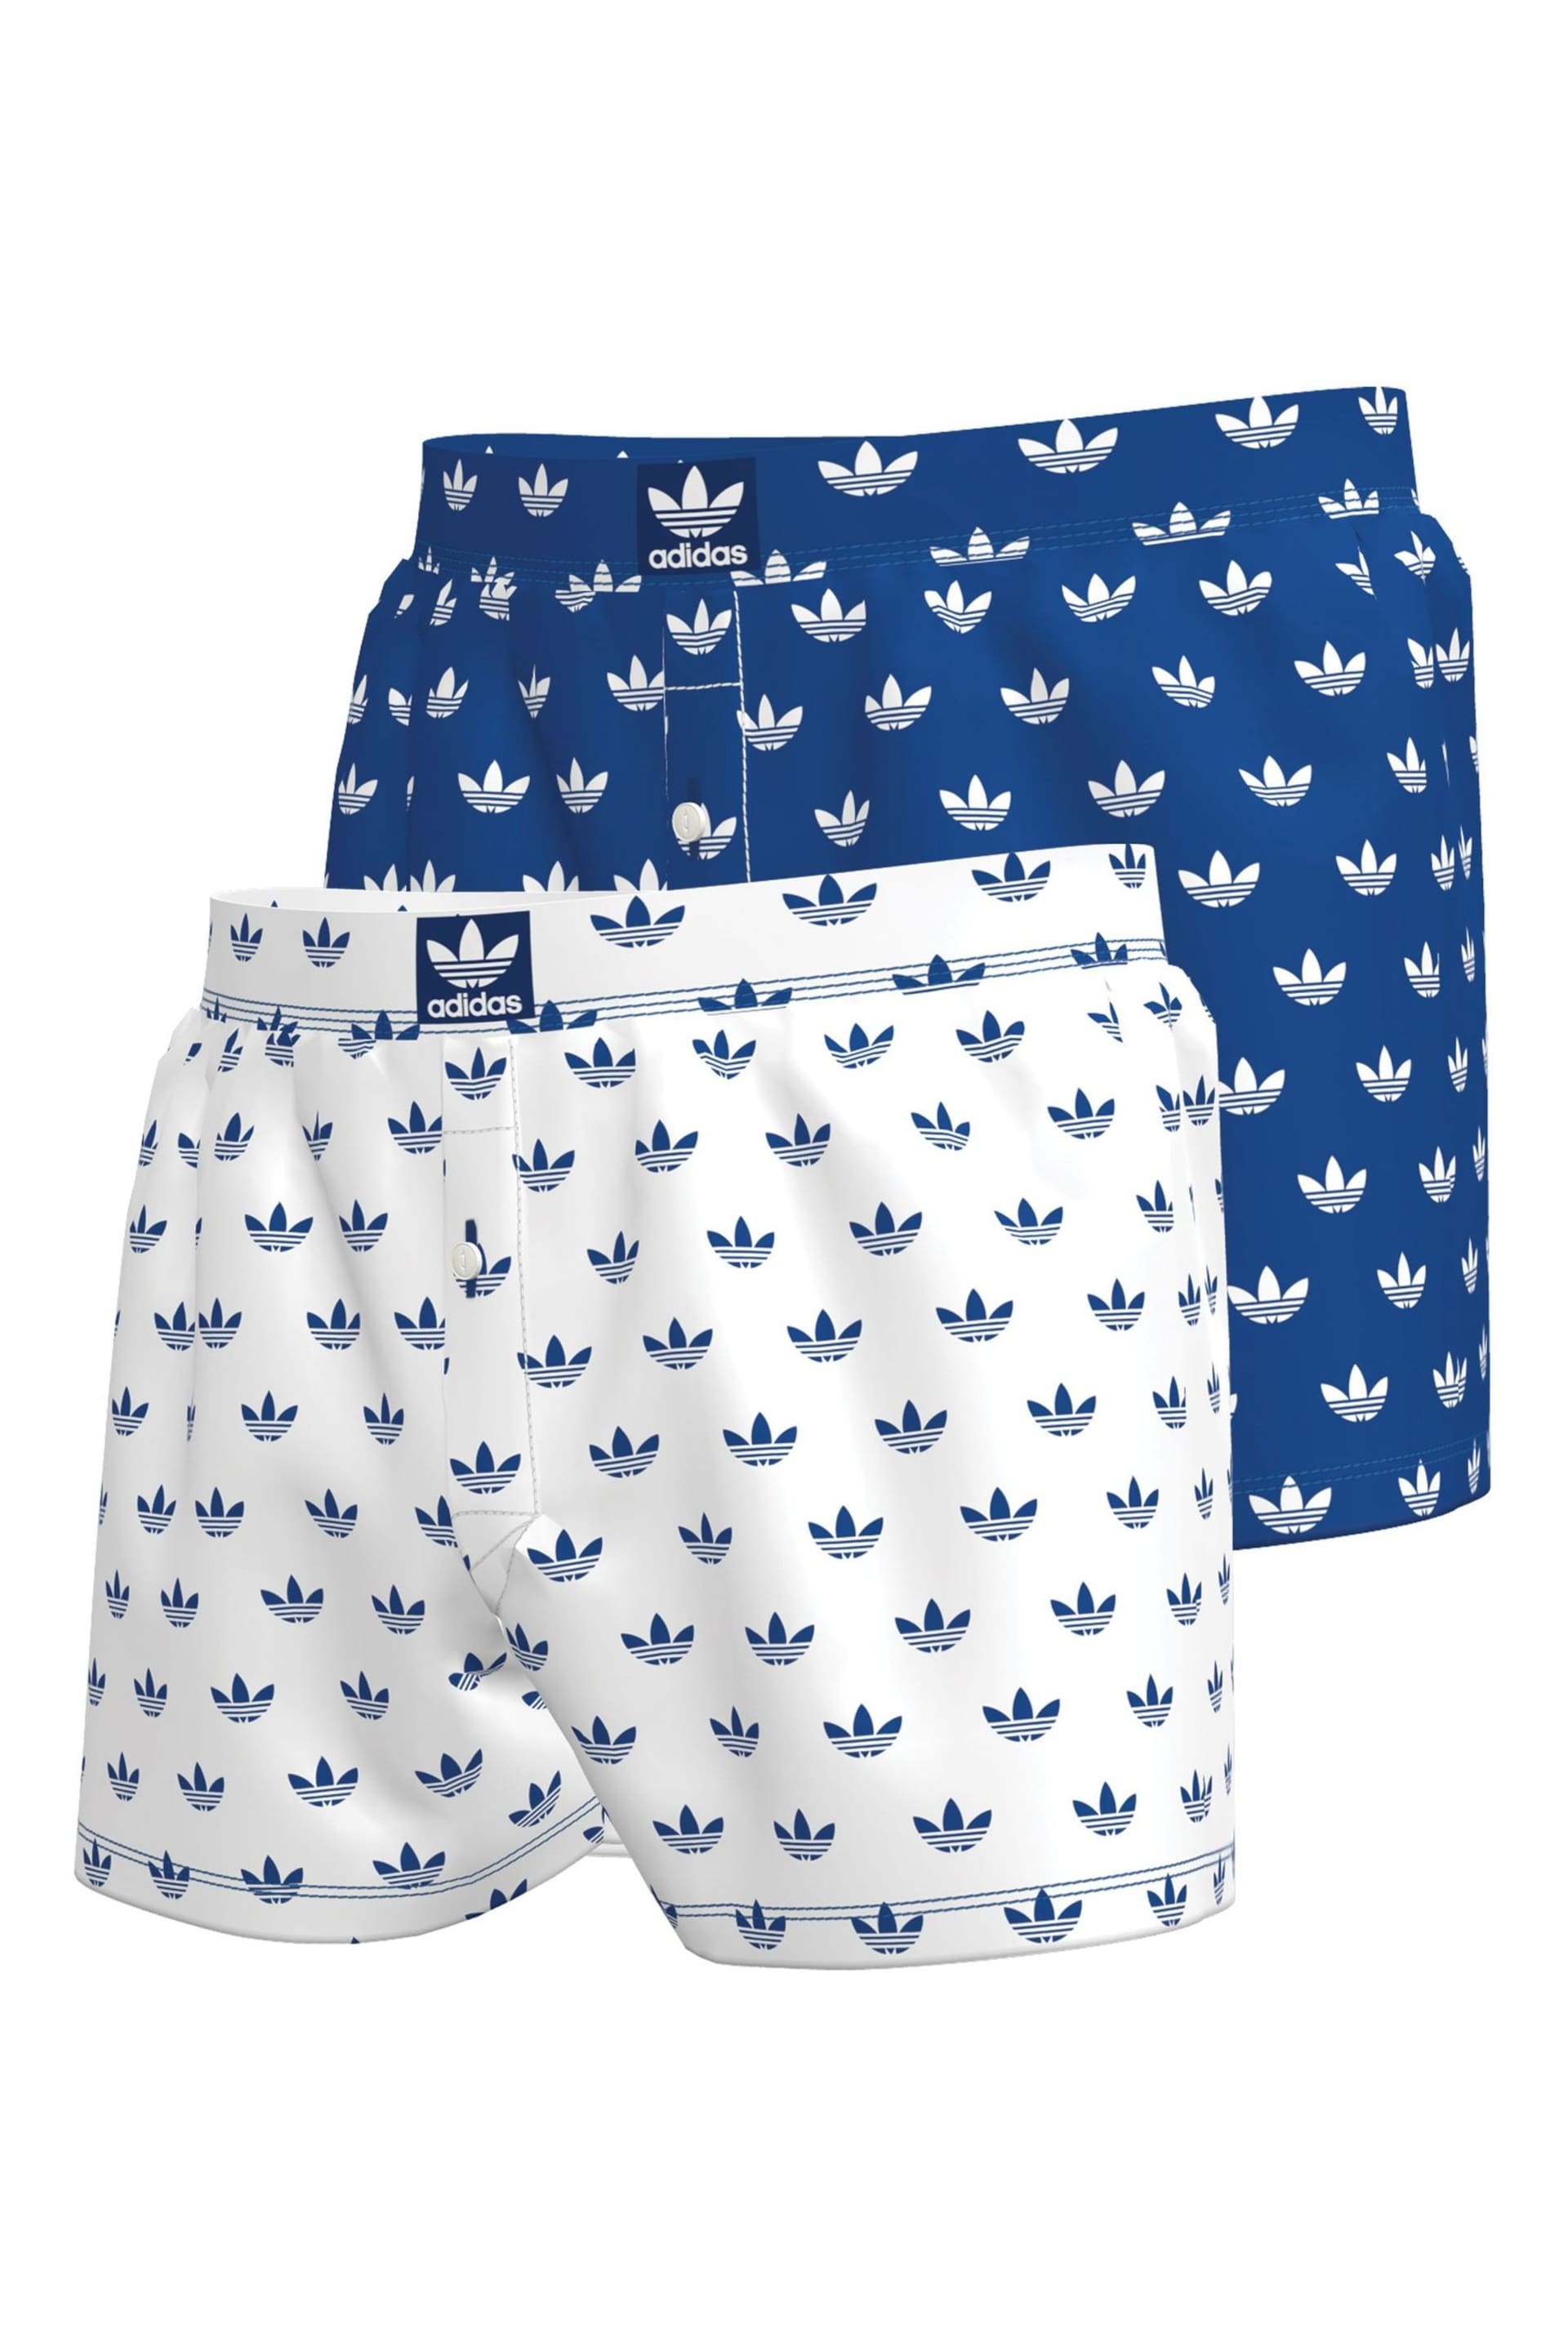 adidas Blue Comfort Core Cotton Icon Boxers 2 Pack - Image 1 of 1